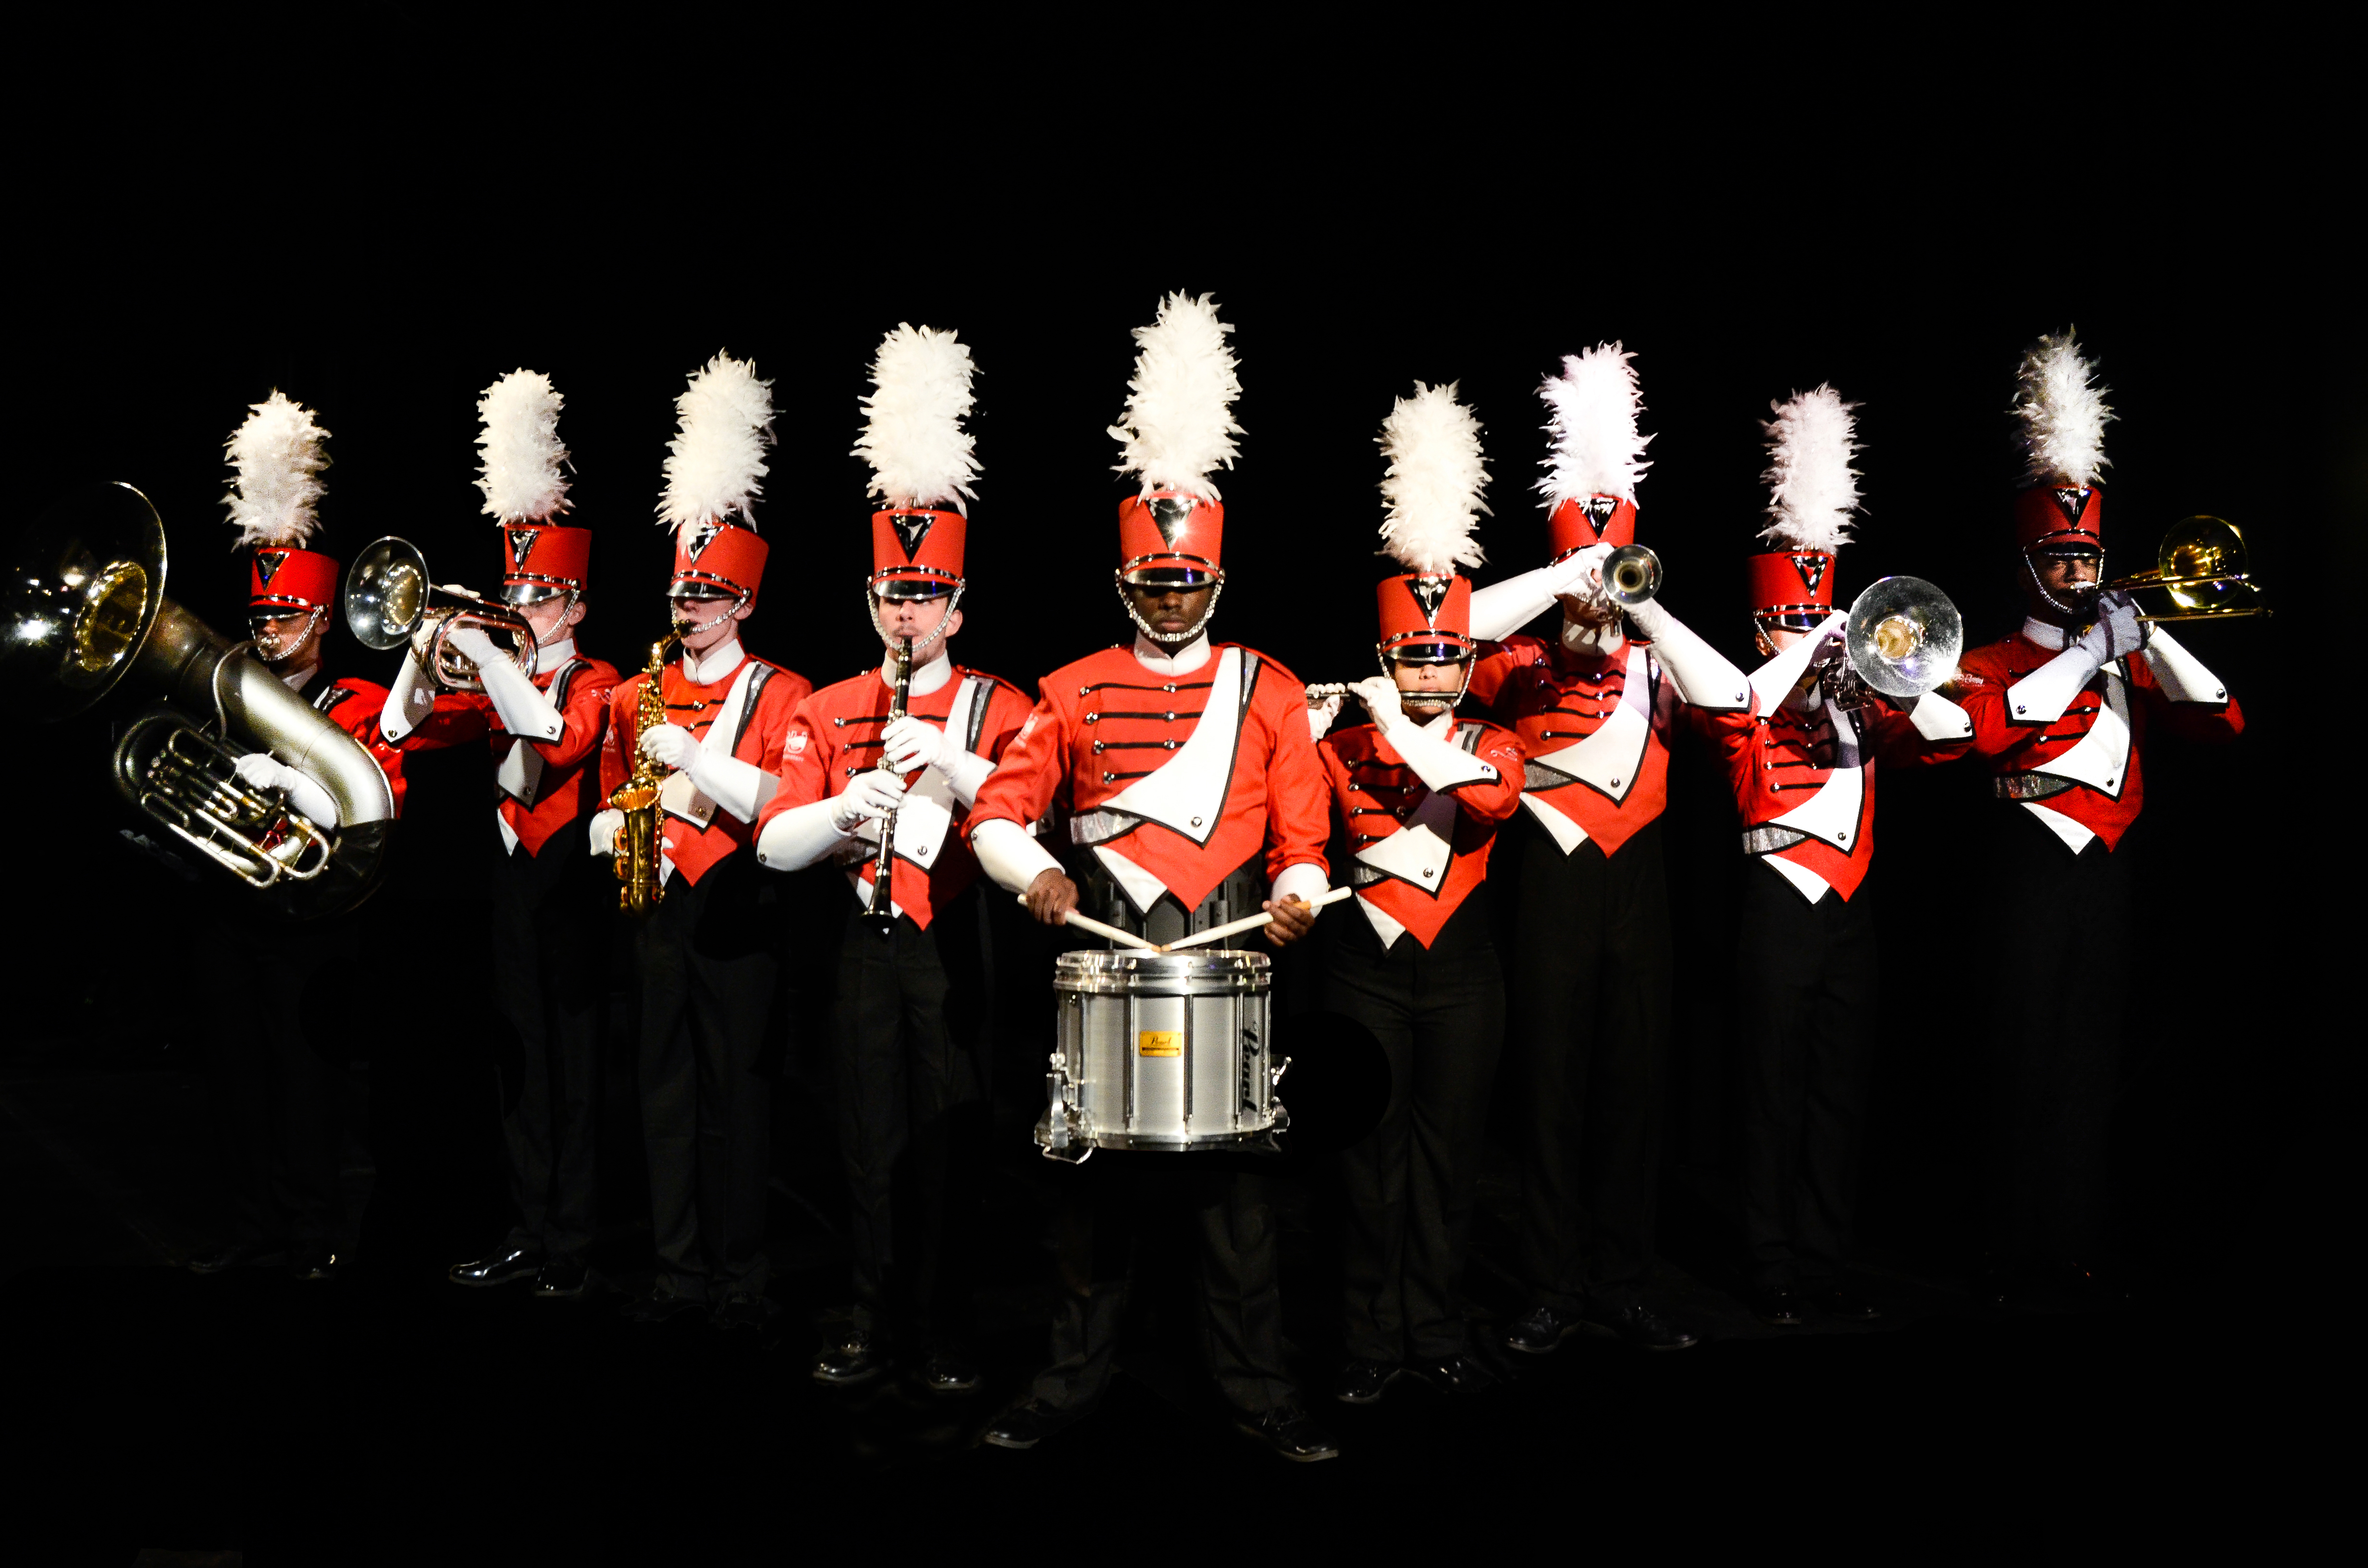 Performers from Trussville, Pinson selected to Jacksonville State's marching band